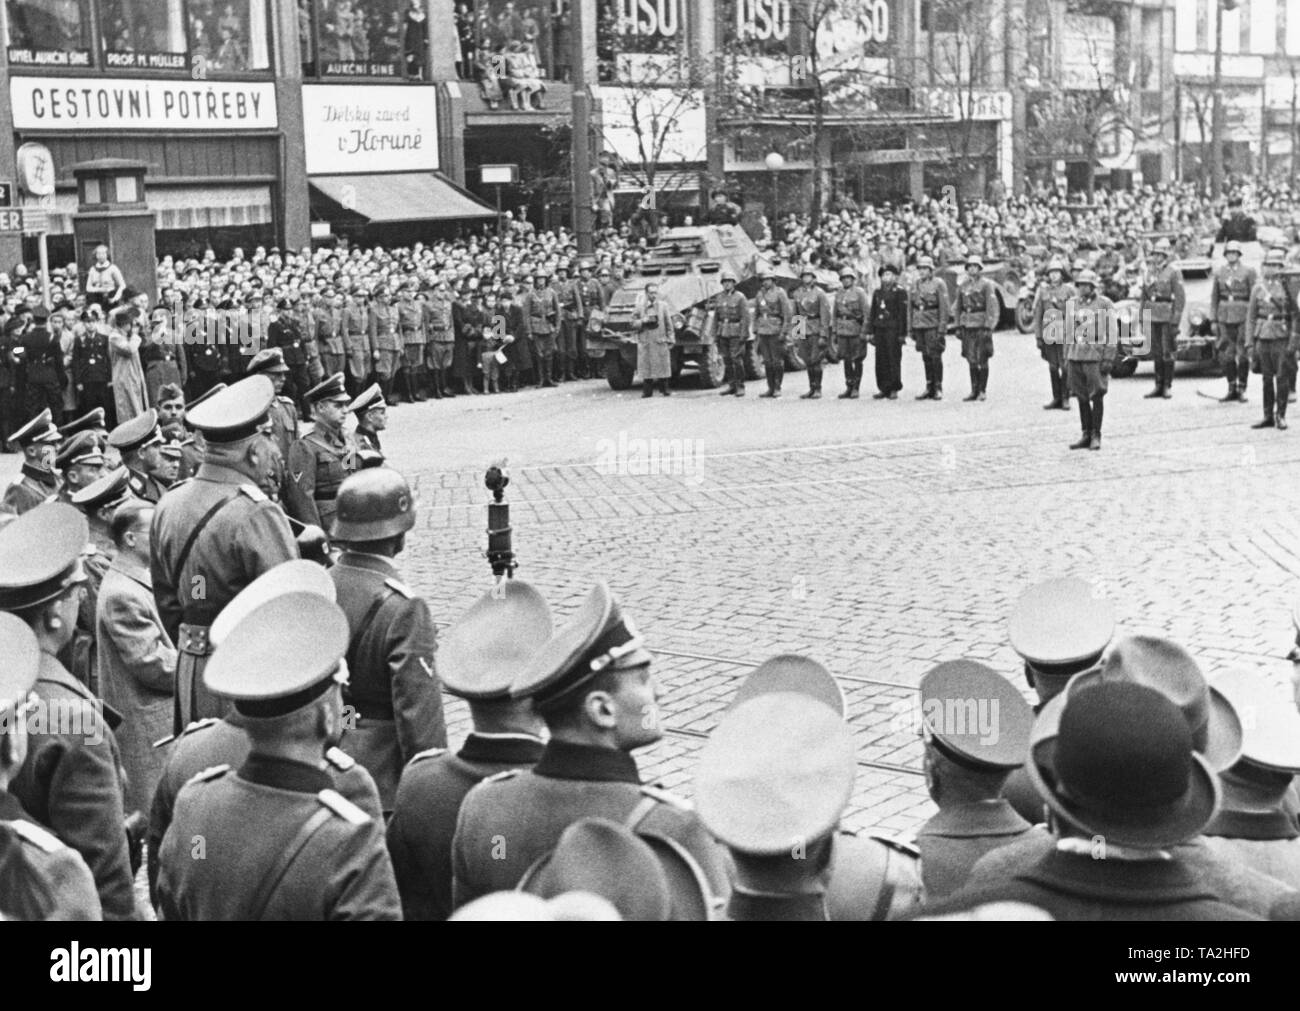 The SS Leibstandarte arrives in Prague after being deployed to the Eastern Front. The soldiers are welcomed at Wenceslas Square. Hitler started World War II by attacking Poland in September. Stock Photo